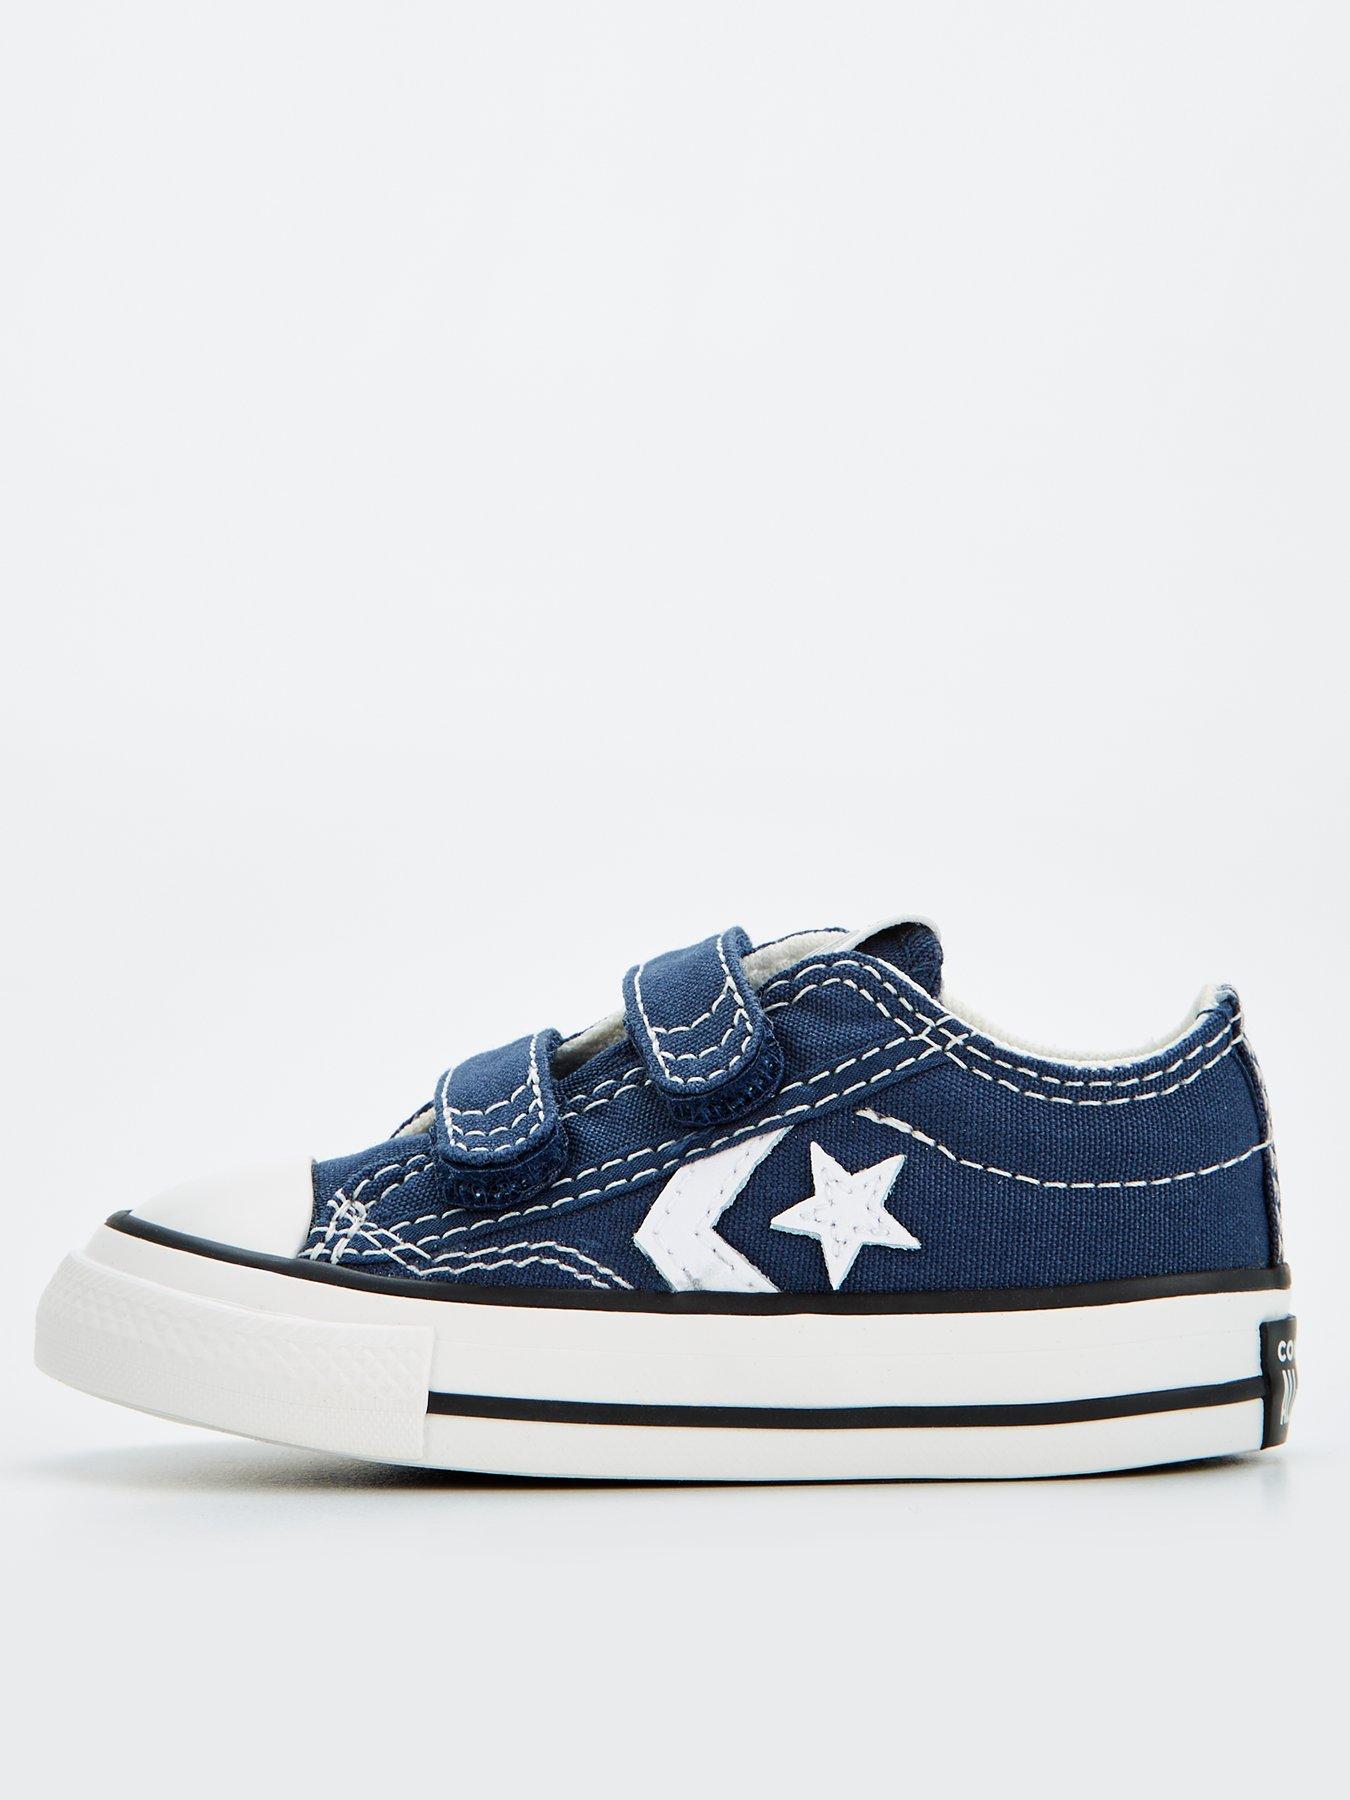 Converse Infant Star Player 76 Ox Trainers - Navy/white, Navy/White, Size 4 Younger